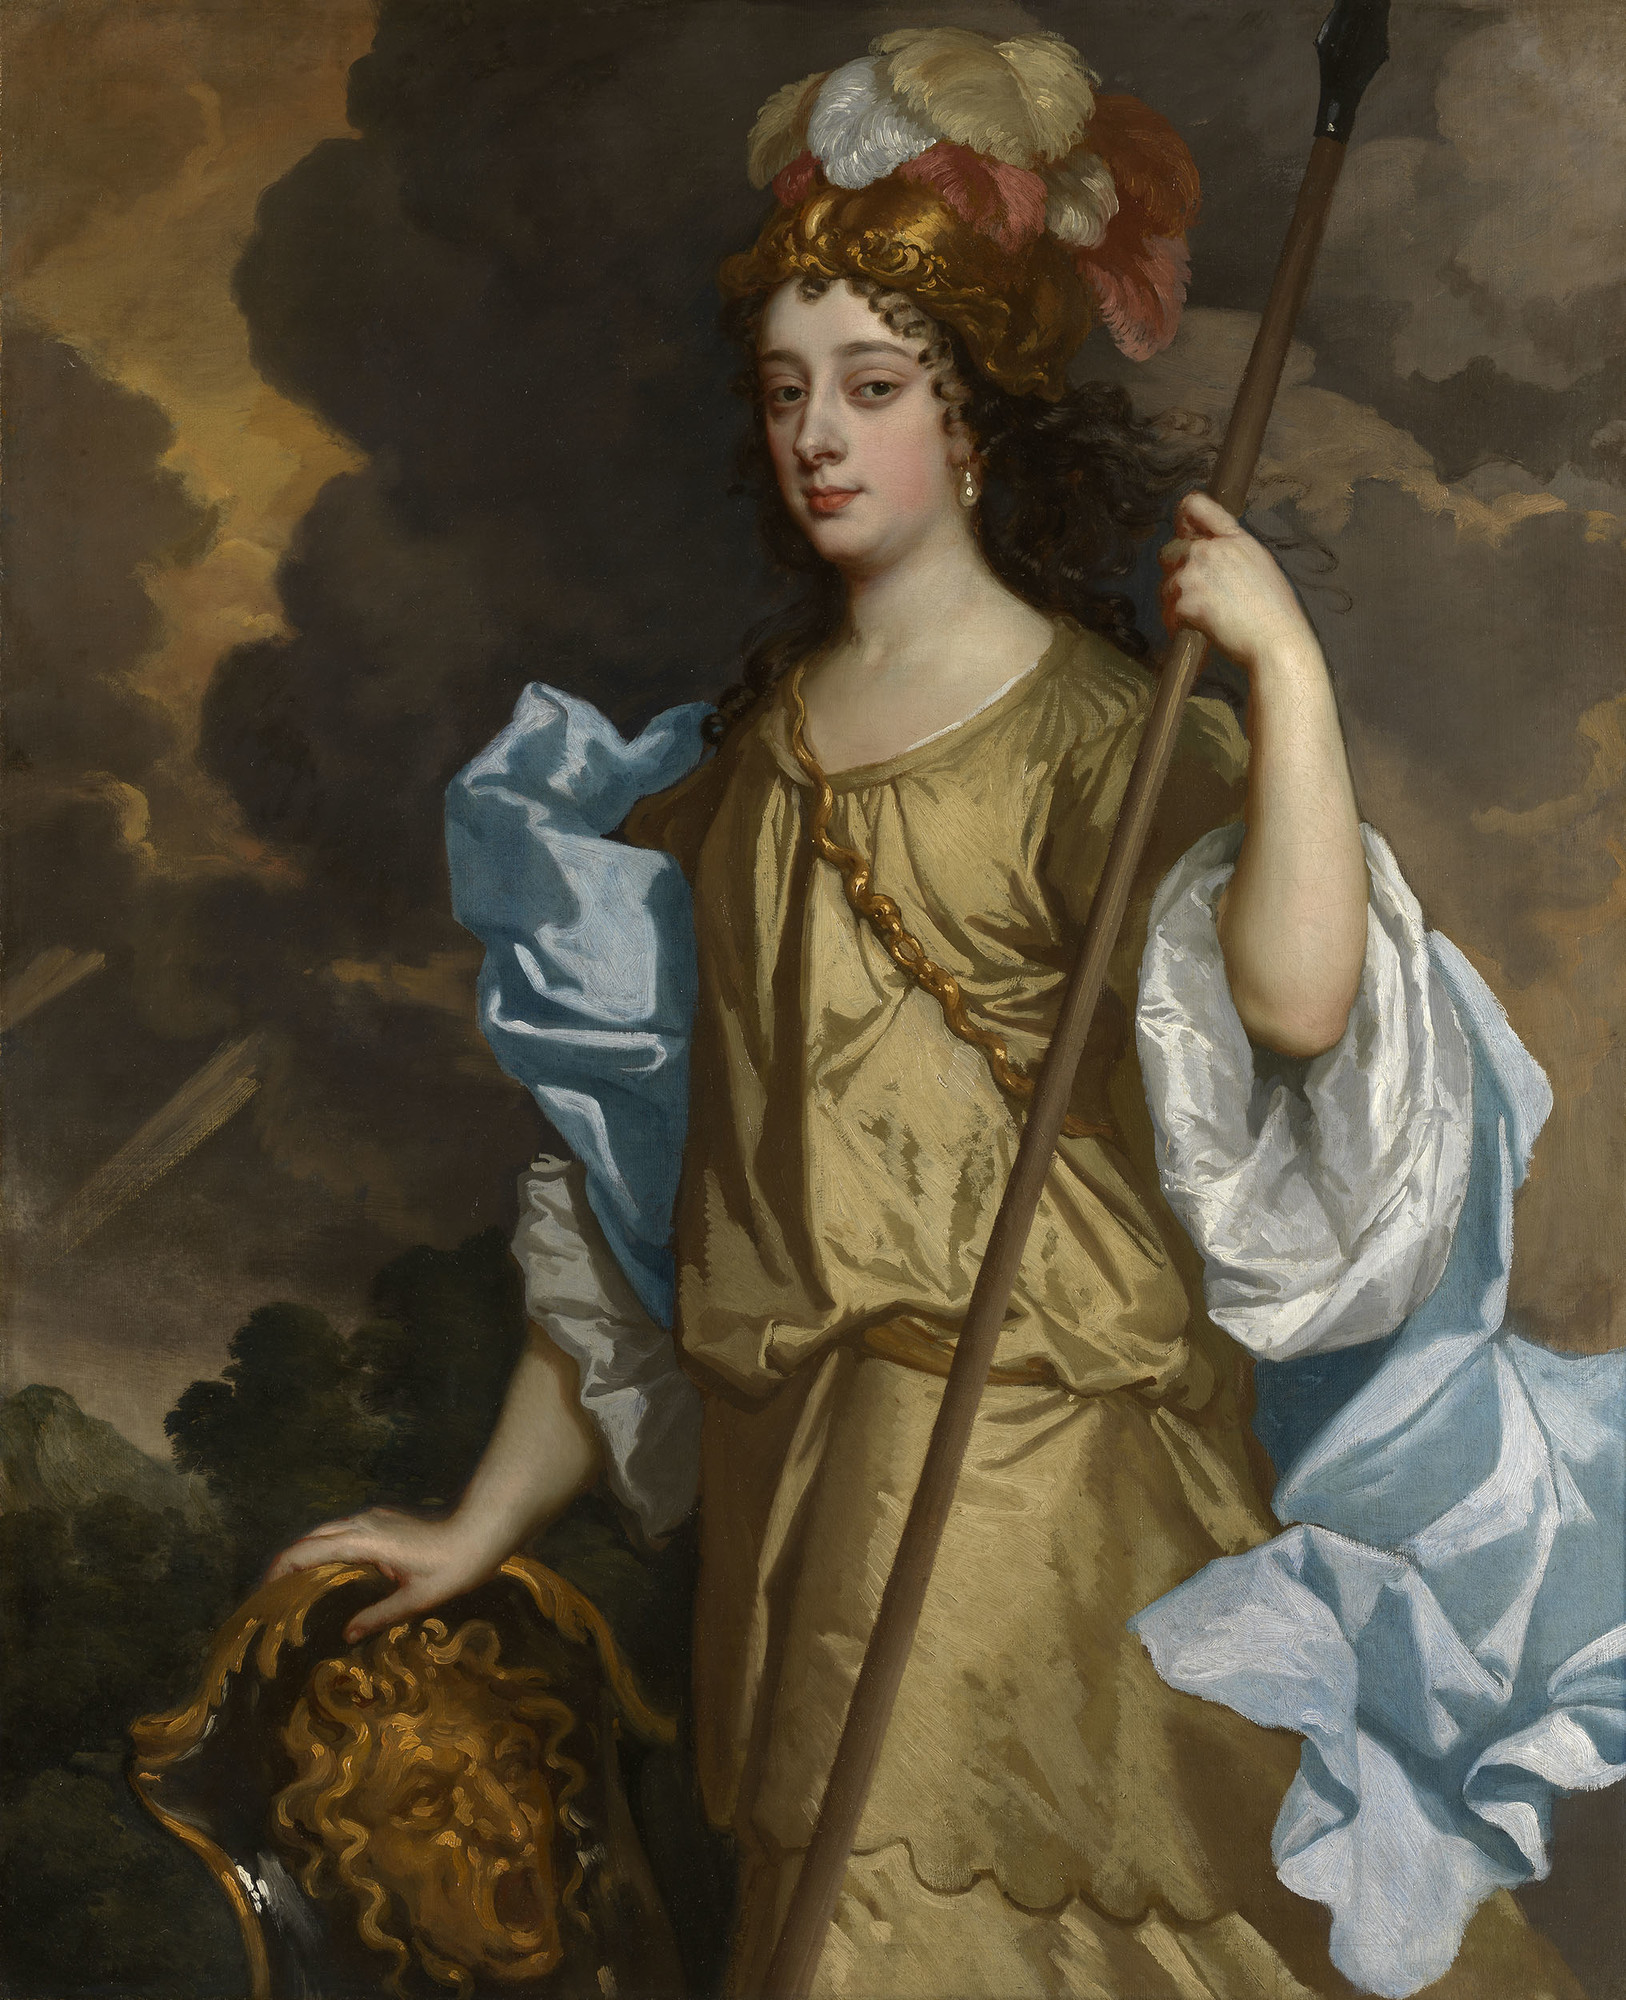 LICENSED_Barbara Palmer (née Villiers), Duchess of Cleveland as Minerva by Peter Lely c. 1663-1665.jpg